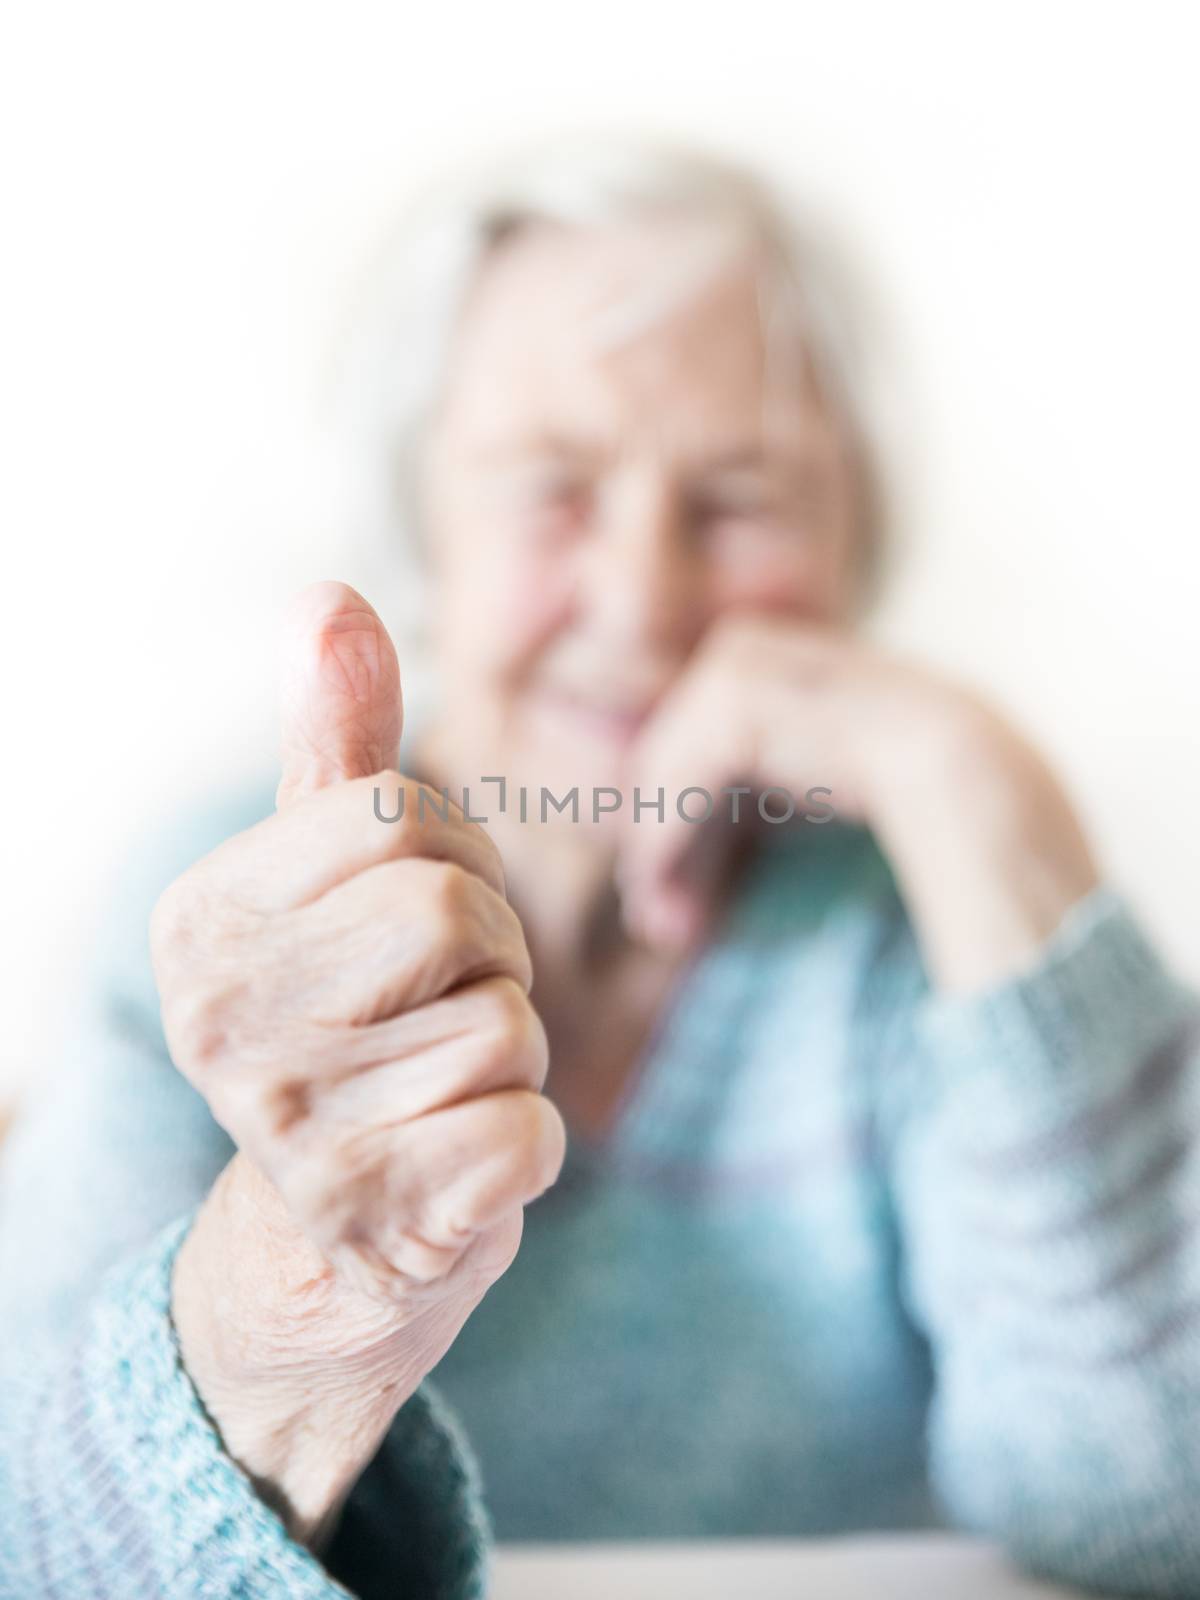 Content 96 years old elderly woman giving a thumb up and looking at camera. Focus on the thumb up, face out of focus. Old age and the quality of life concept.